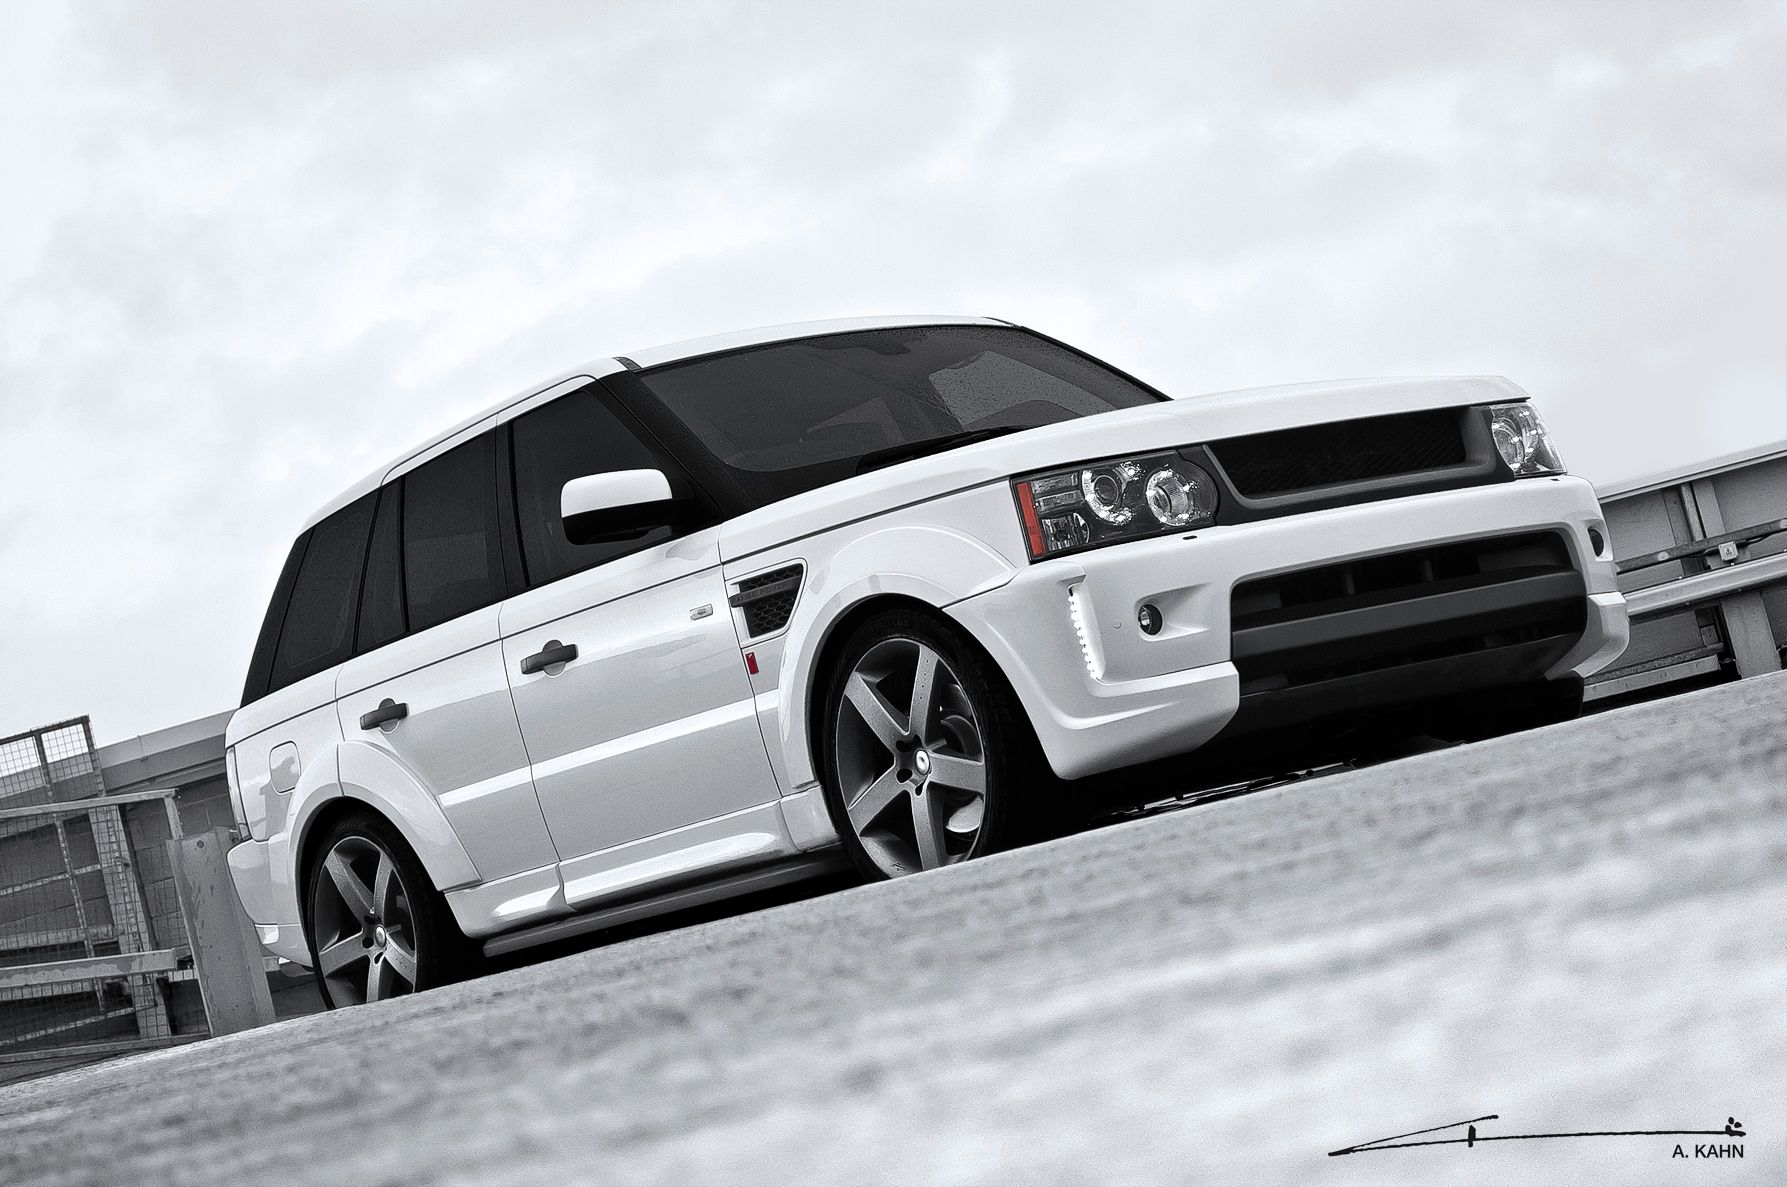 2011 Range Rover Sport RS300 Cosworth by Kahn Design